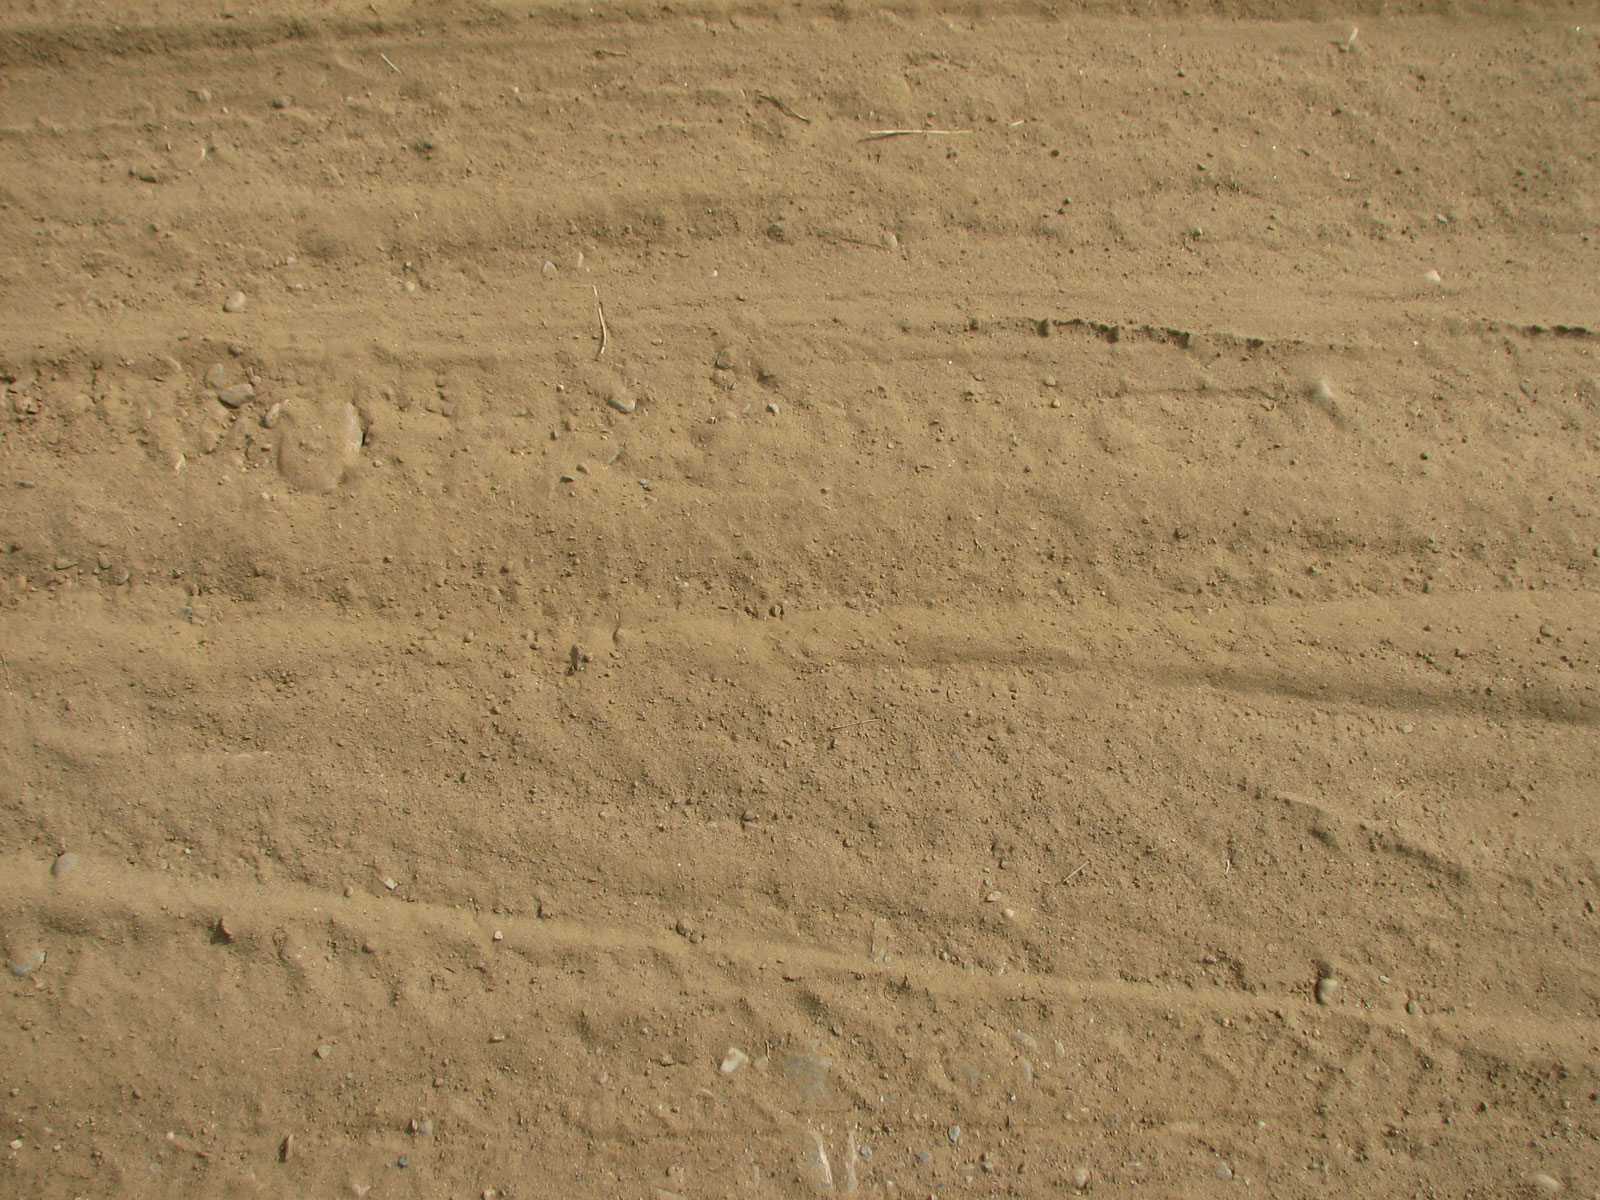 Dust-tracks for 1600 x 1200 resolution